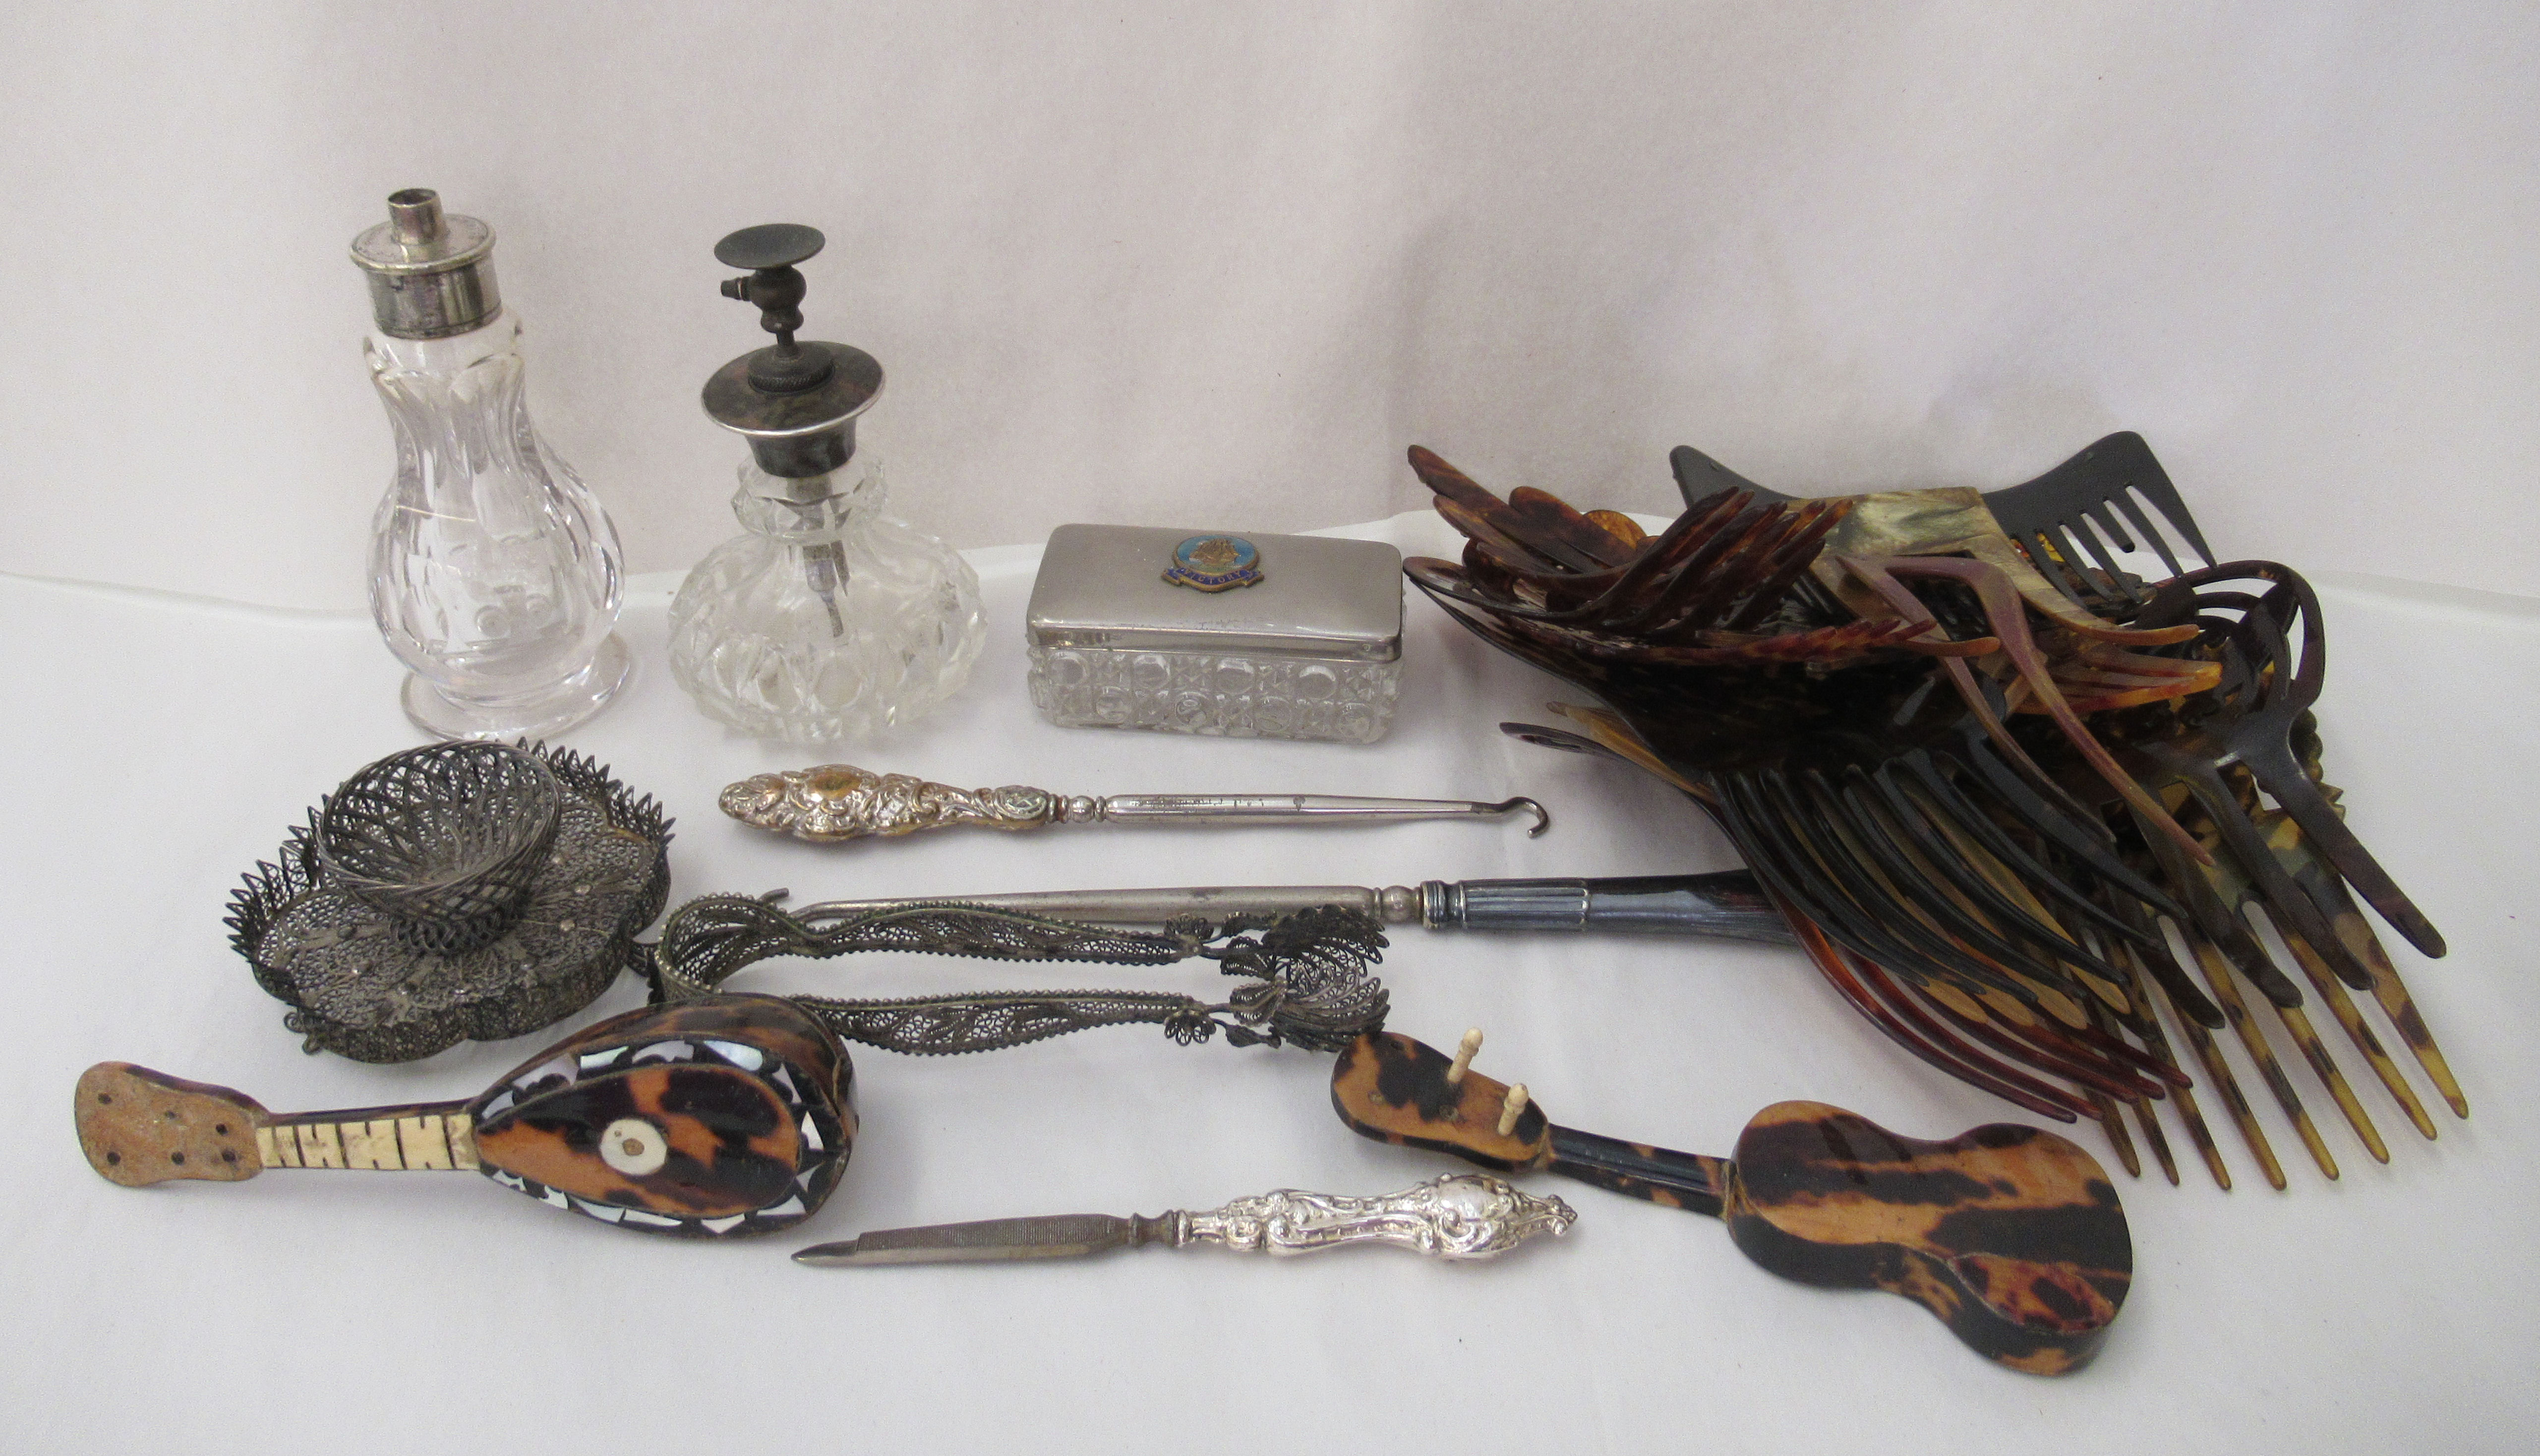 Dressing table accessories: to include filigree items; and tortoiseshell combs/hair grips